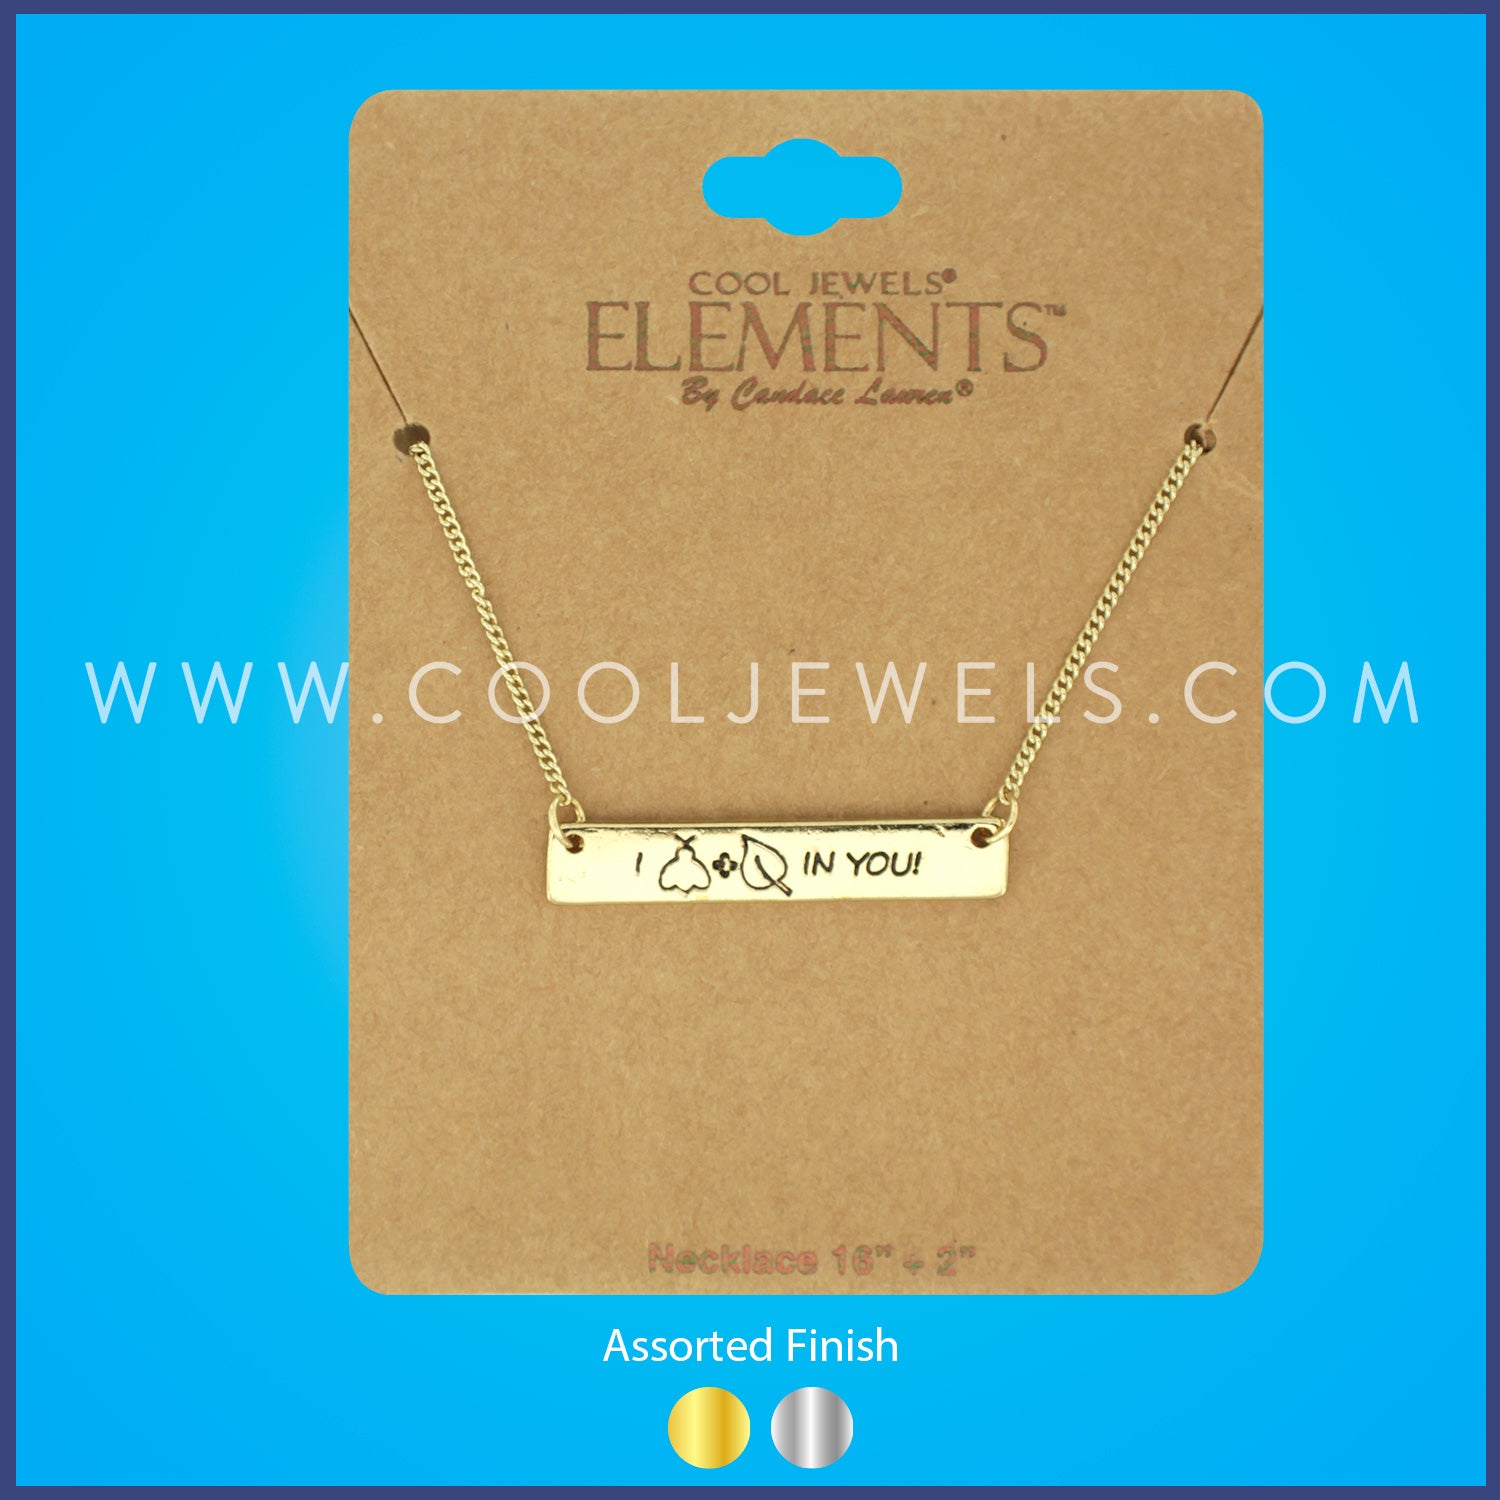 NECKLACE WITH "I BELIEVE IN YOU" PENDANT ON BLUE NATURAL CHIC NK CARD - ASSORTED COLORS